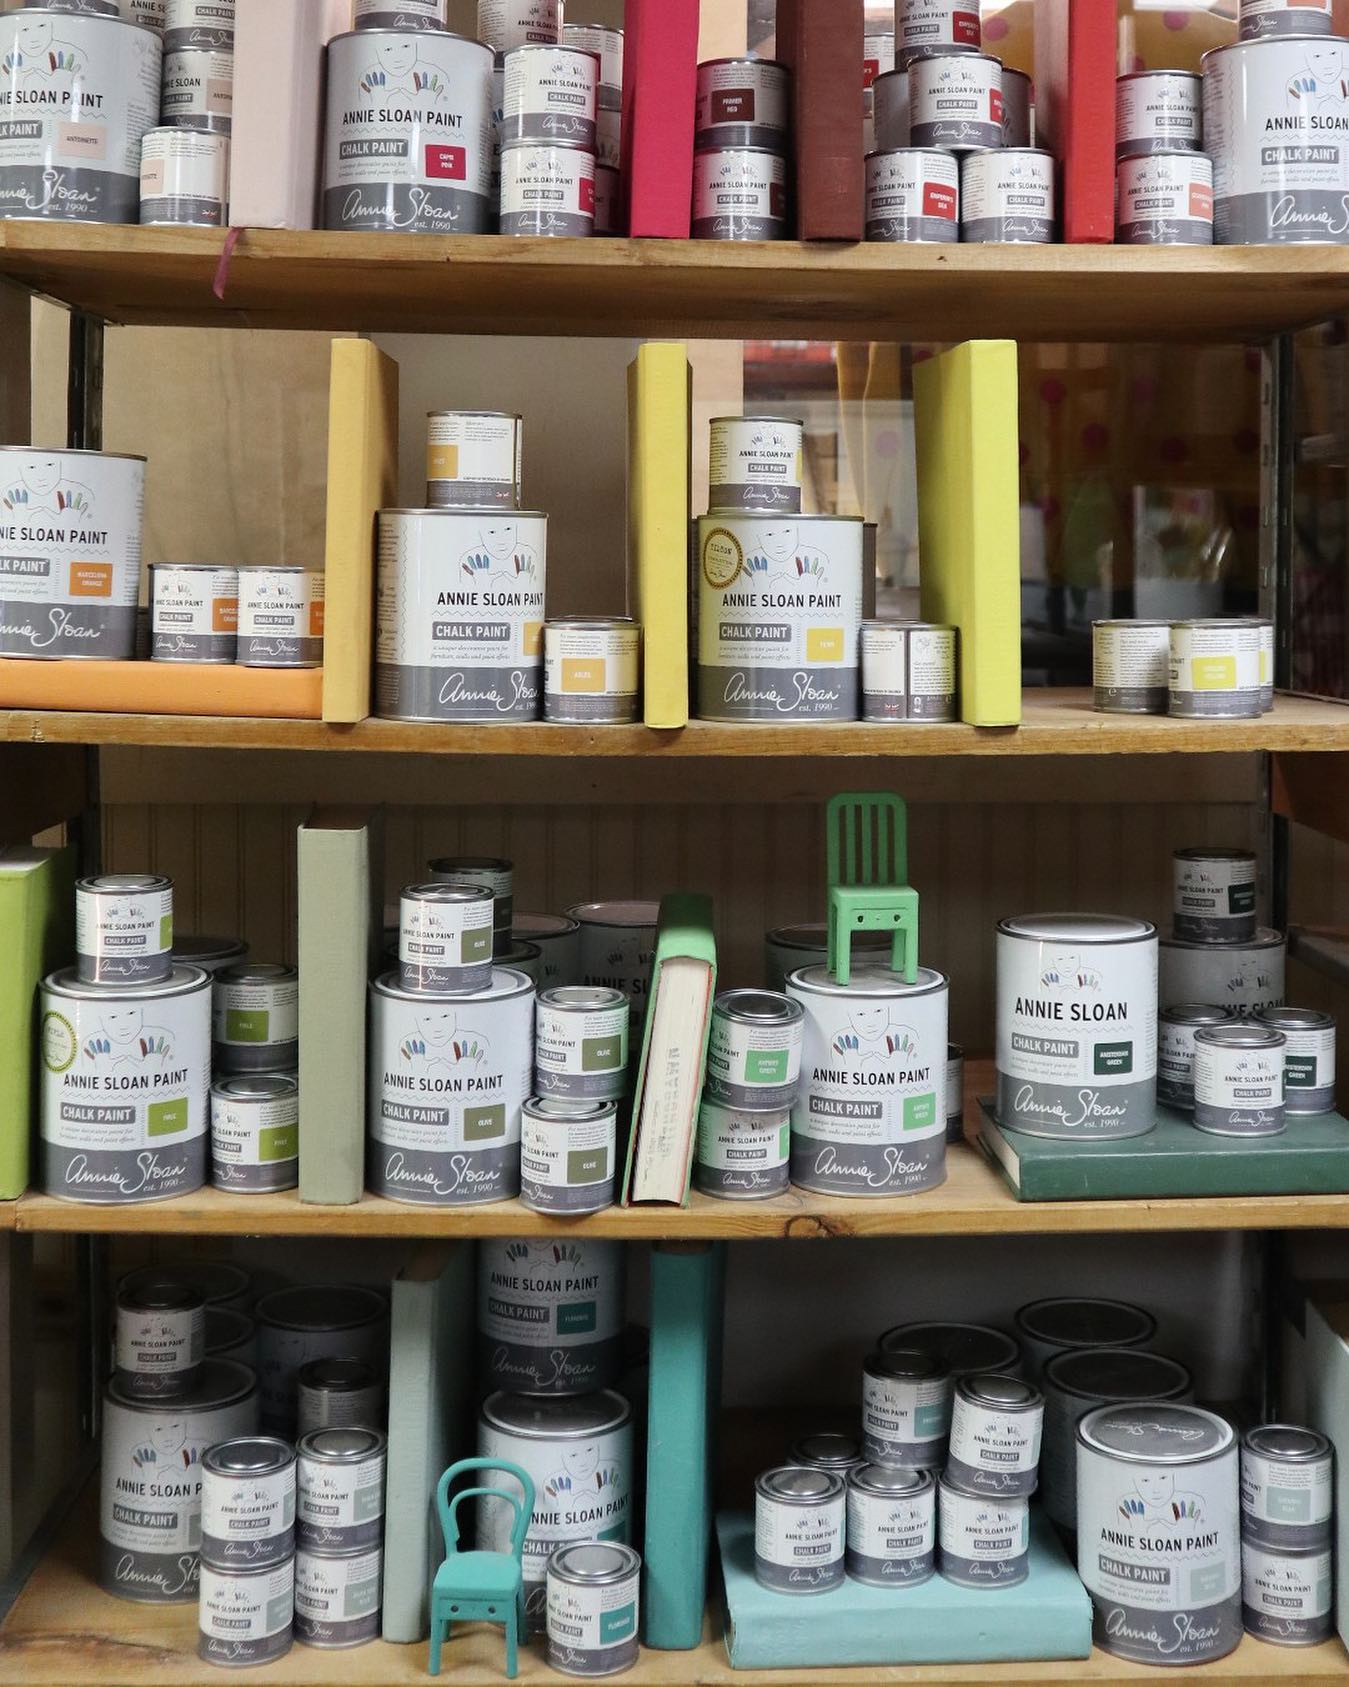 Annie Sloan Paint and Accessories